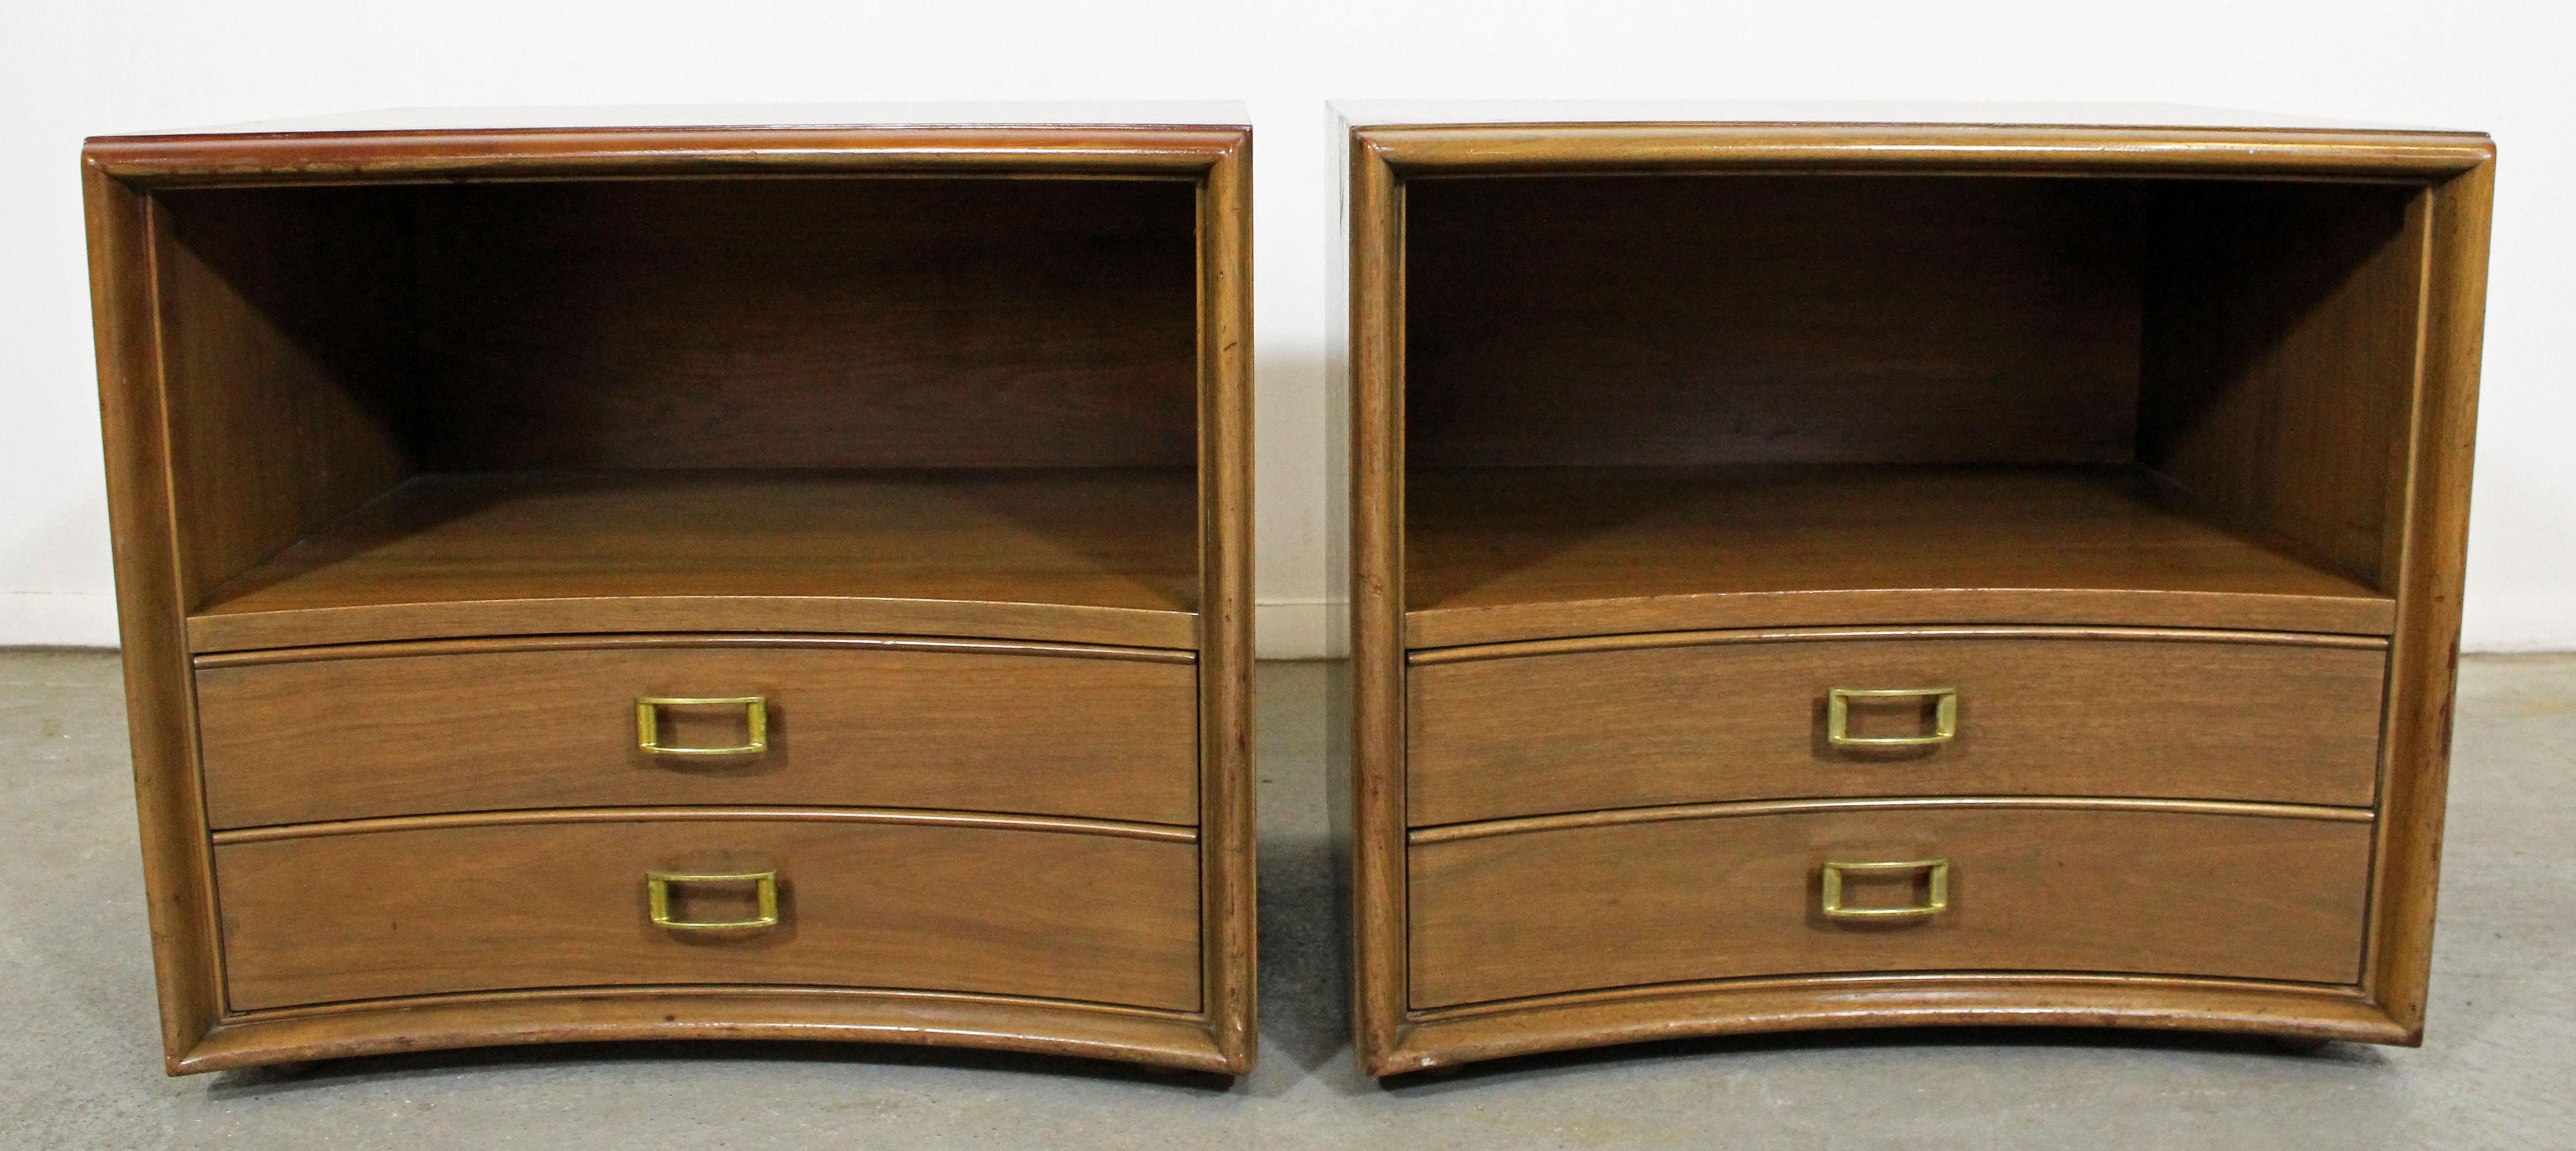 Offered is a pair of Mid-Century Modern nightstands. The set has a nice shape and modern lines. Made from satin birch, these nightstands were designed by Paul Frankl for John Stuart Furniture's 